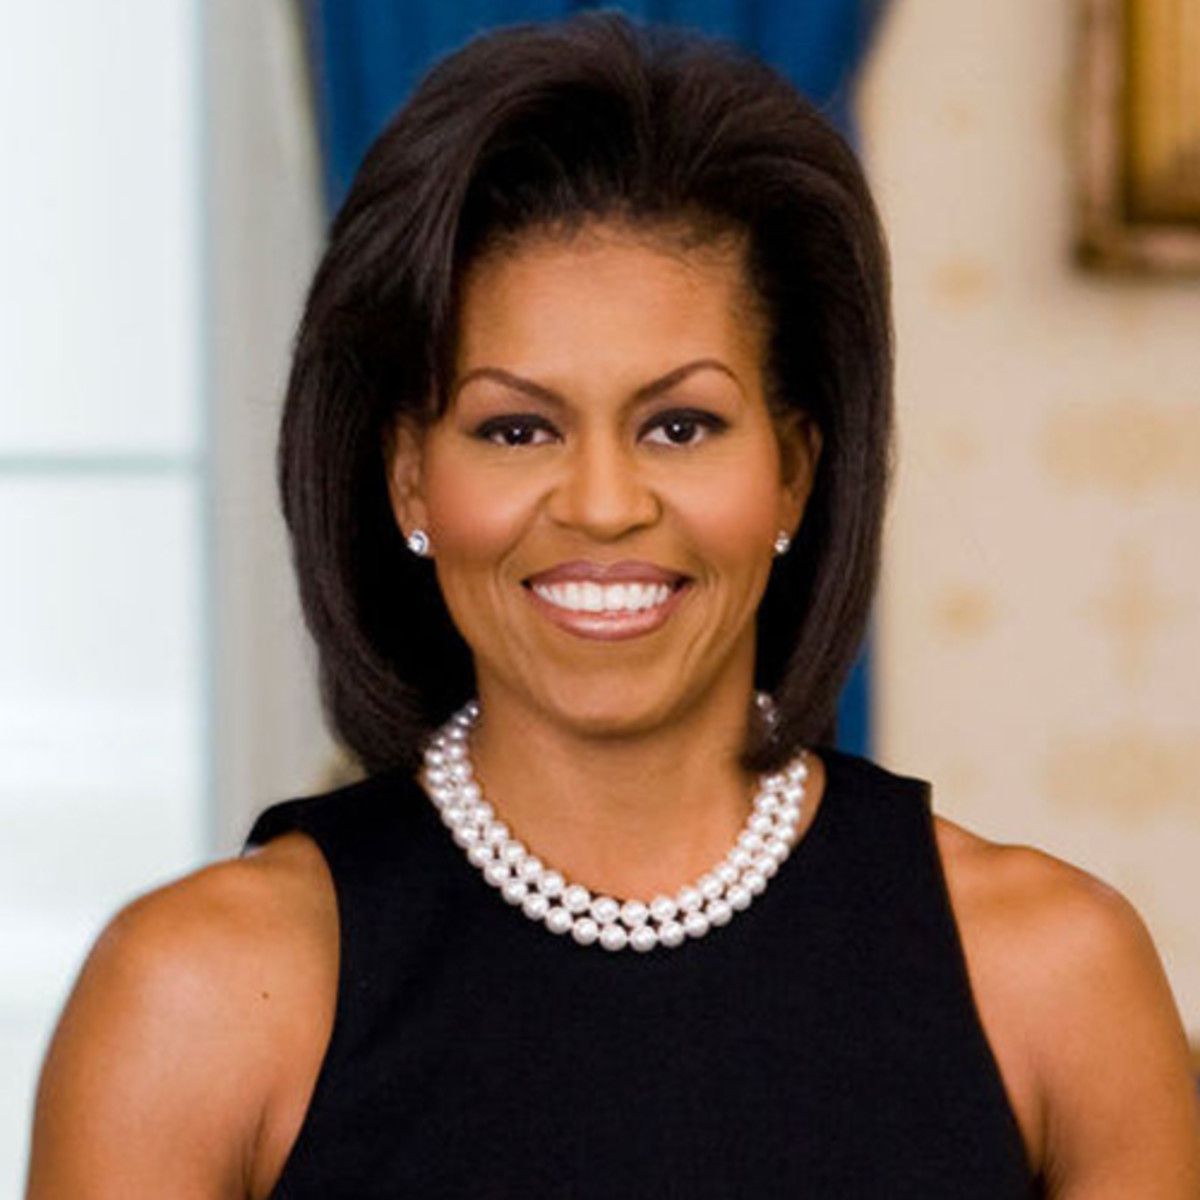 Michelle Obama Biography, Biodata, Wiki, Age, Height, Weight, Affairs & More